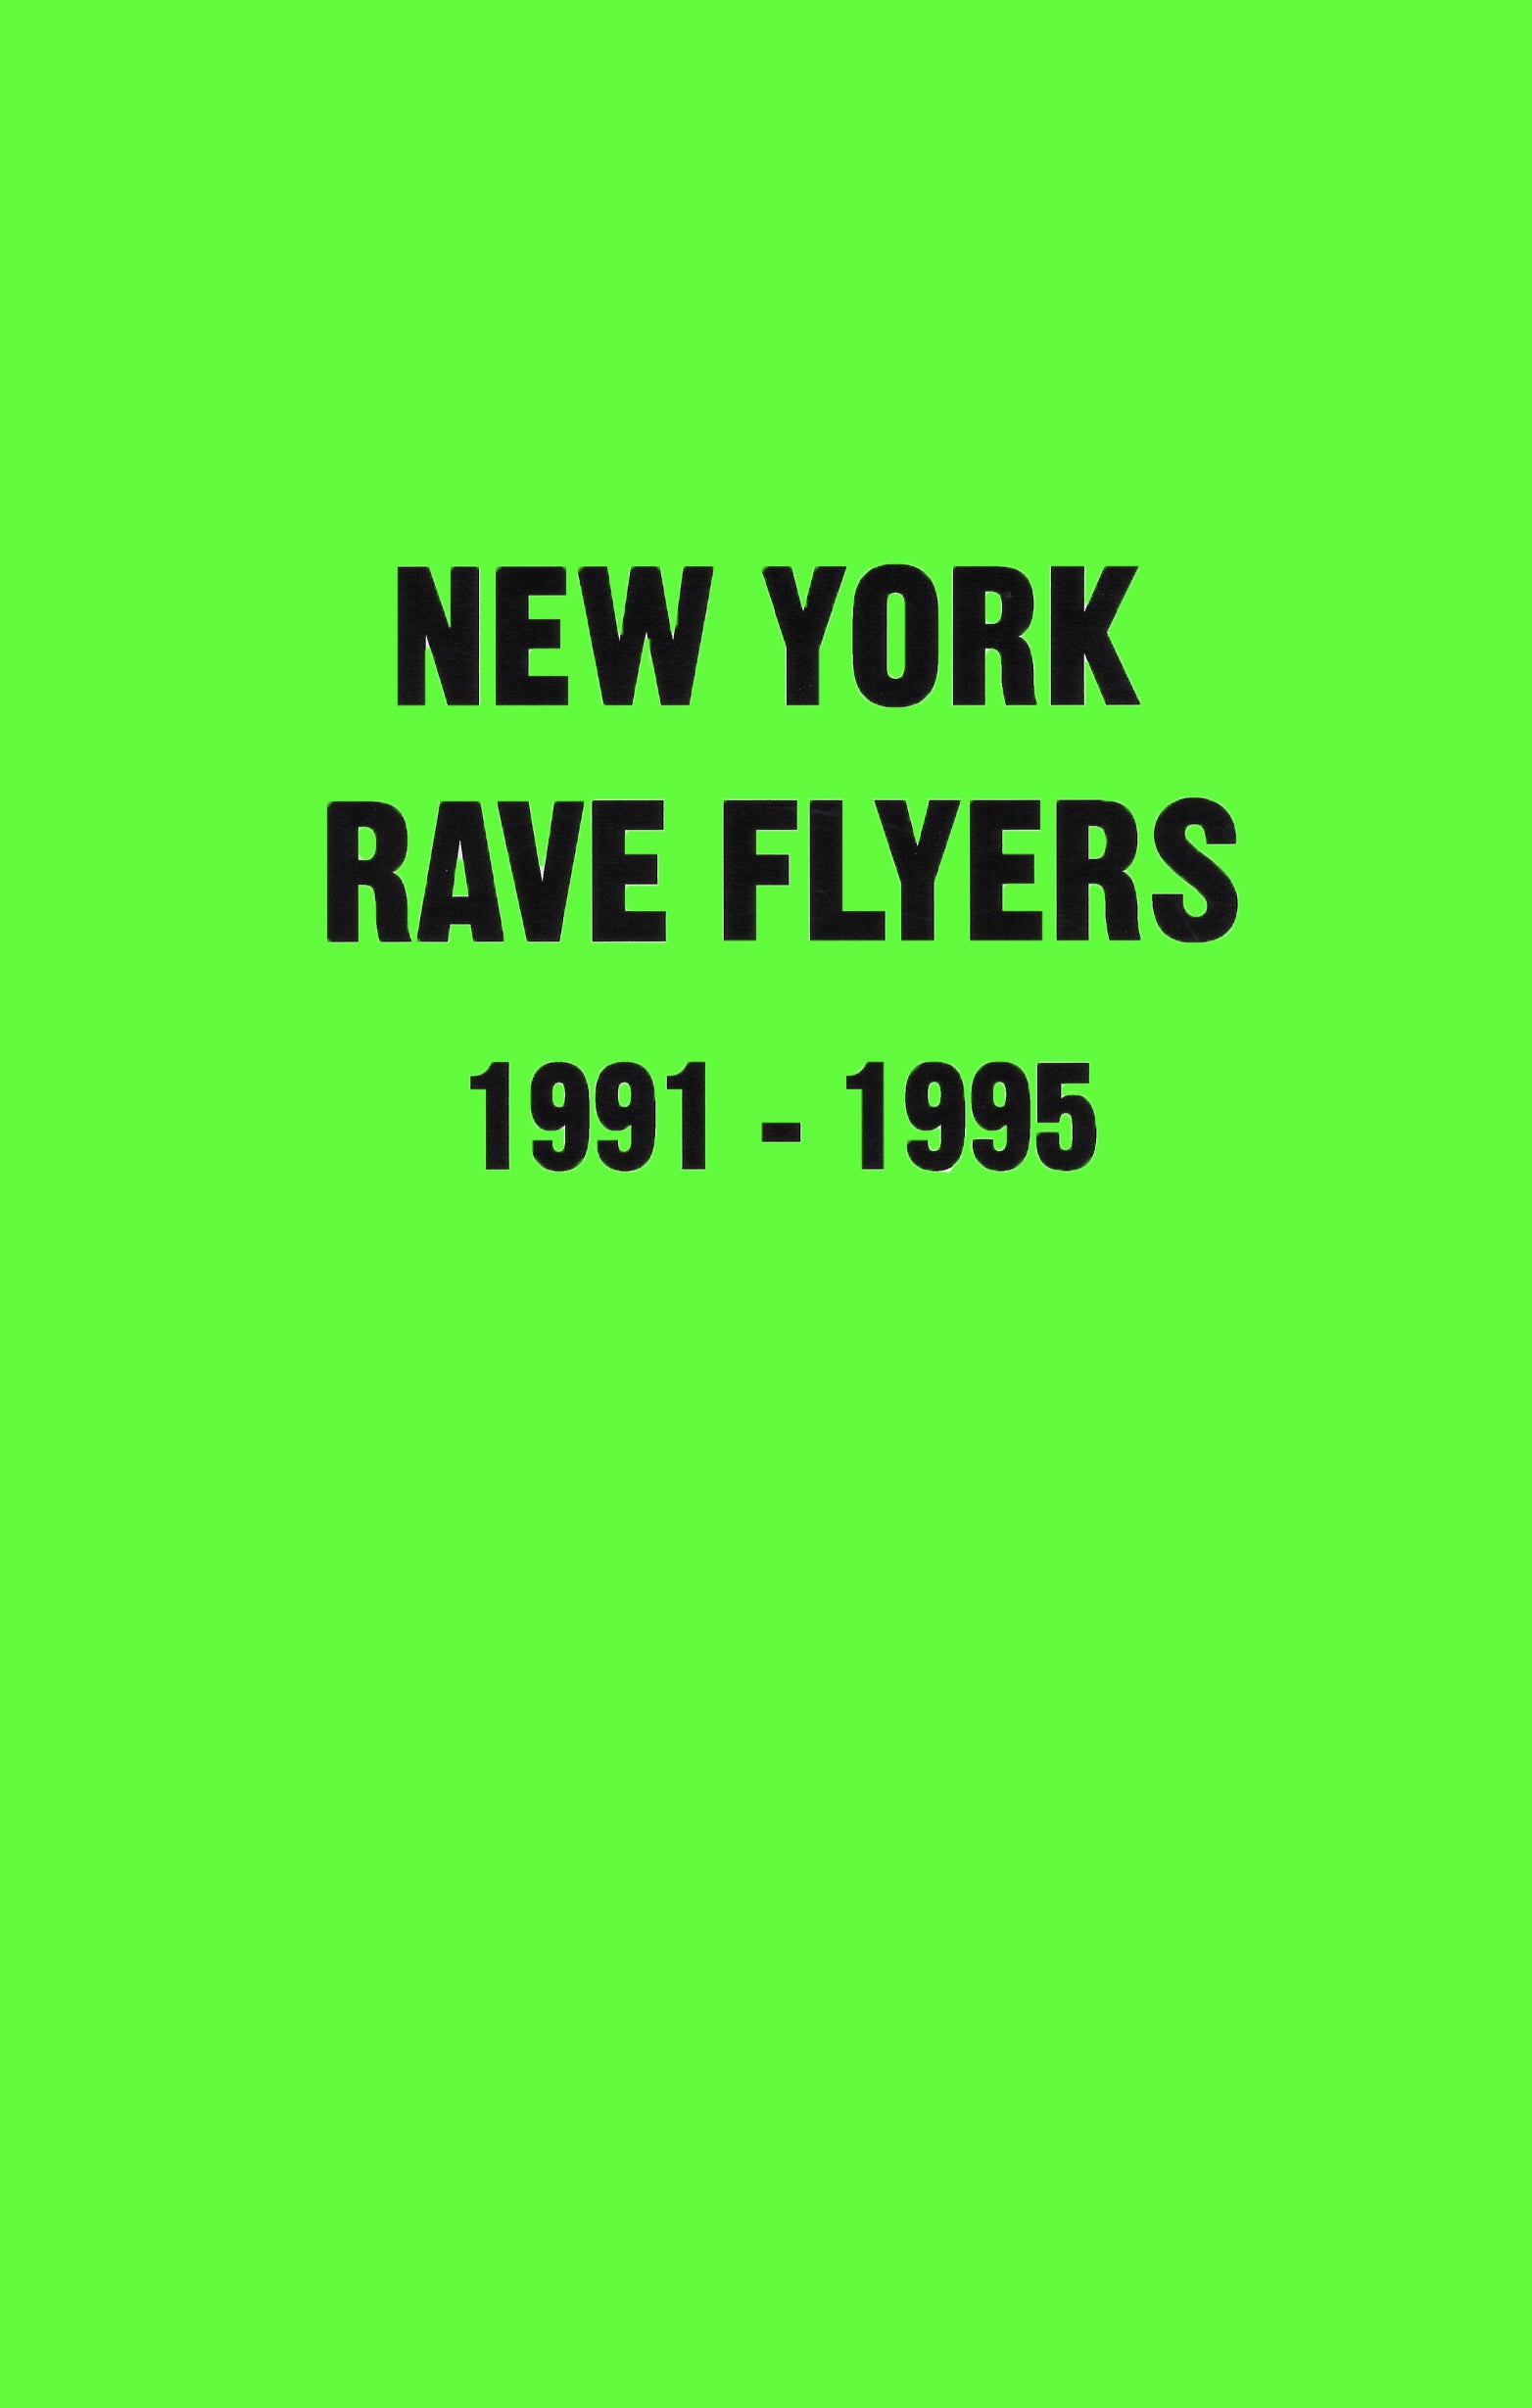 The lost art of the Rave Flyer